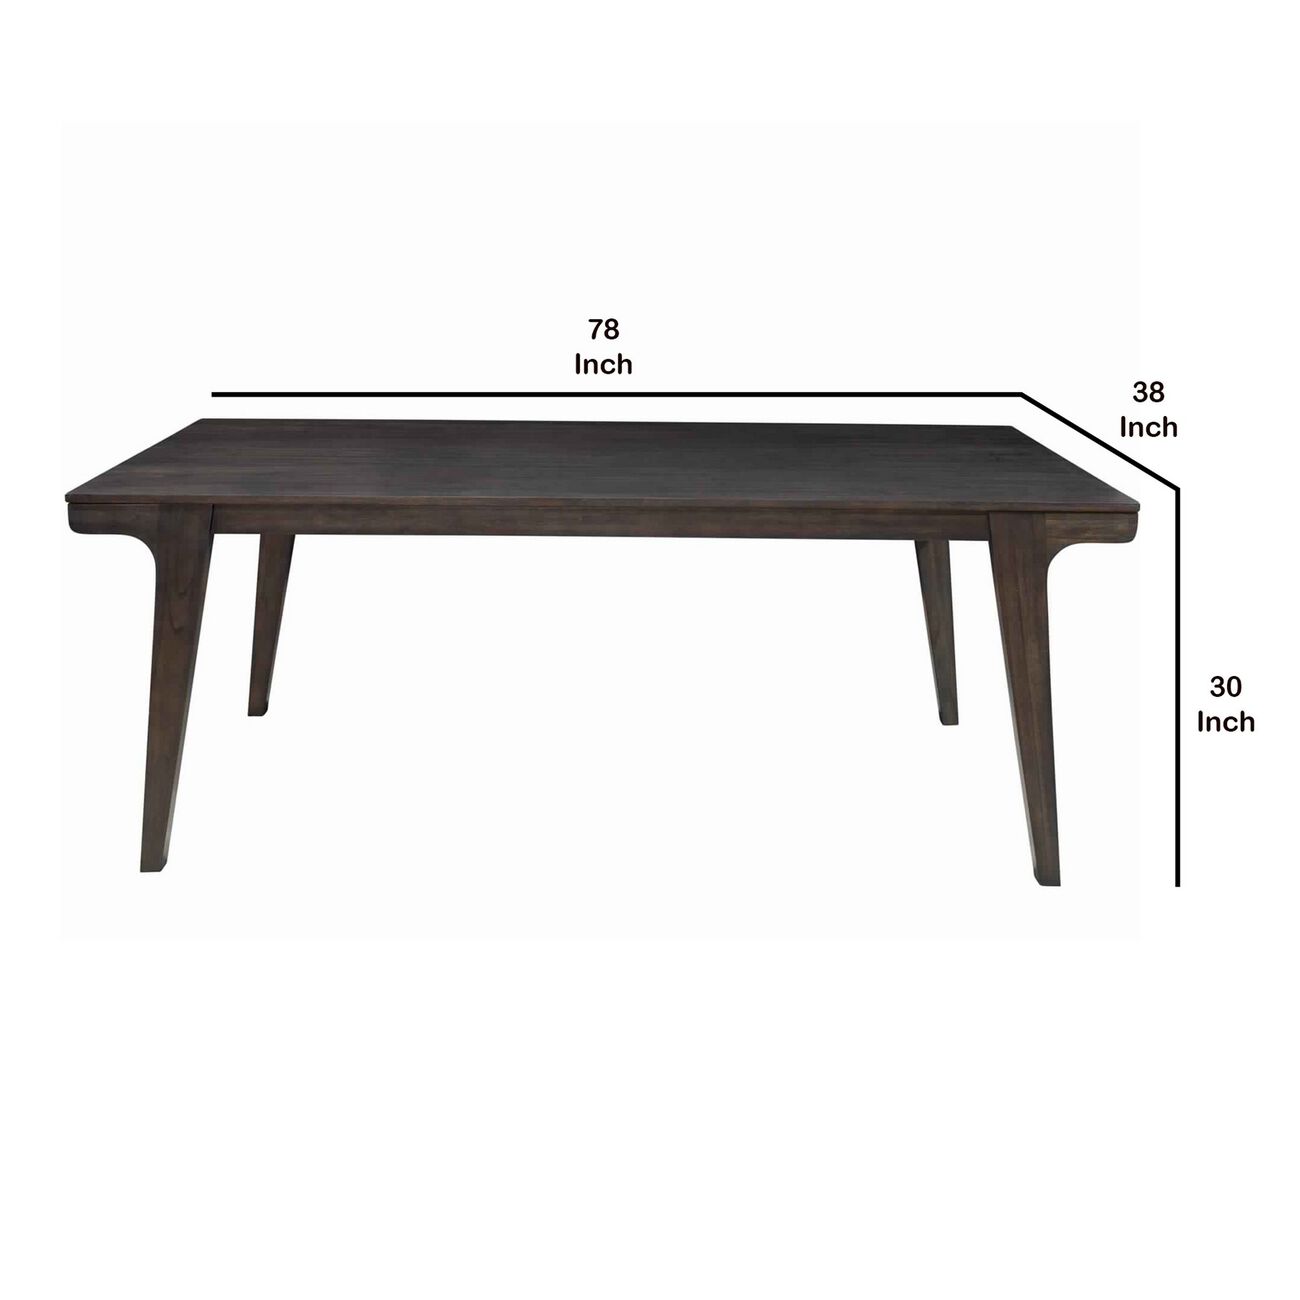 Rectangular Dining Table with Angled Legs and Grain Details, Brown